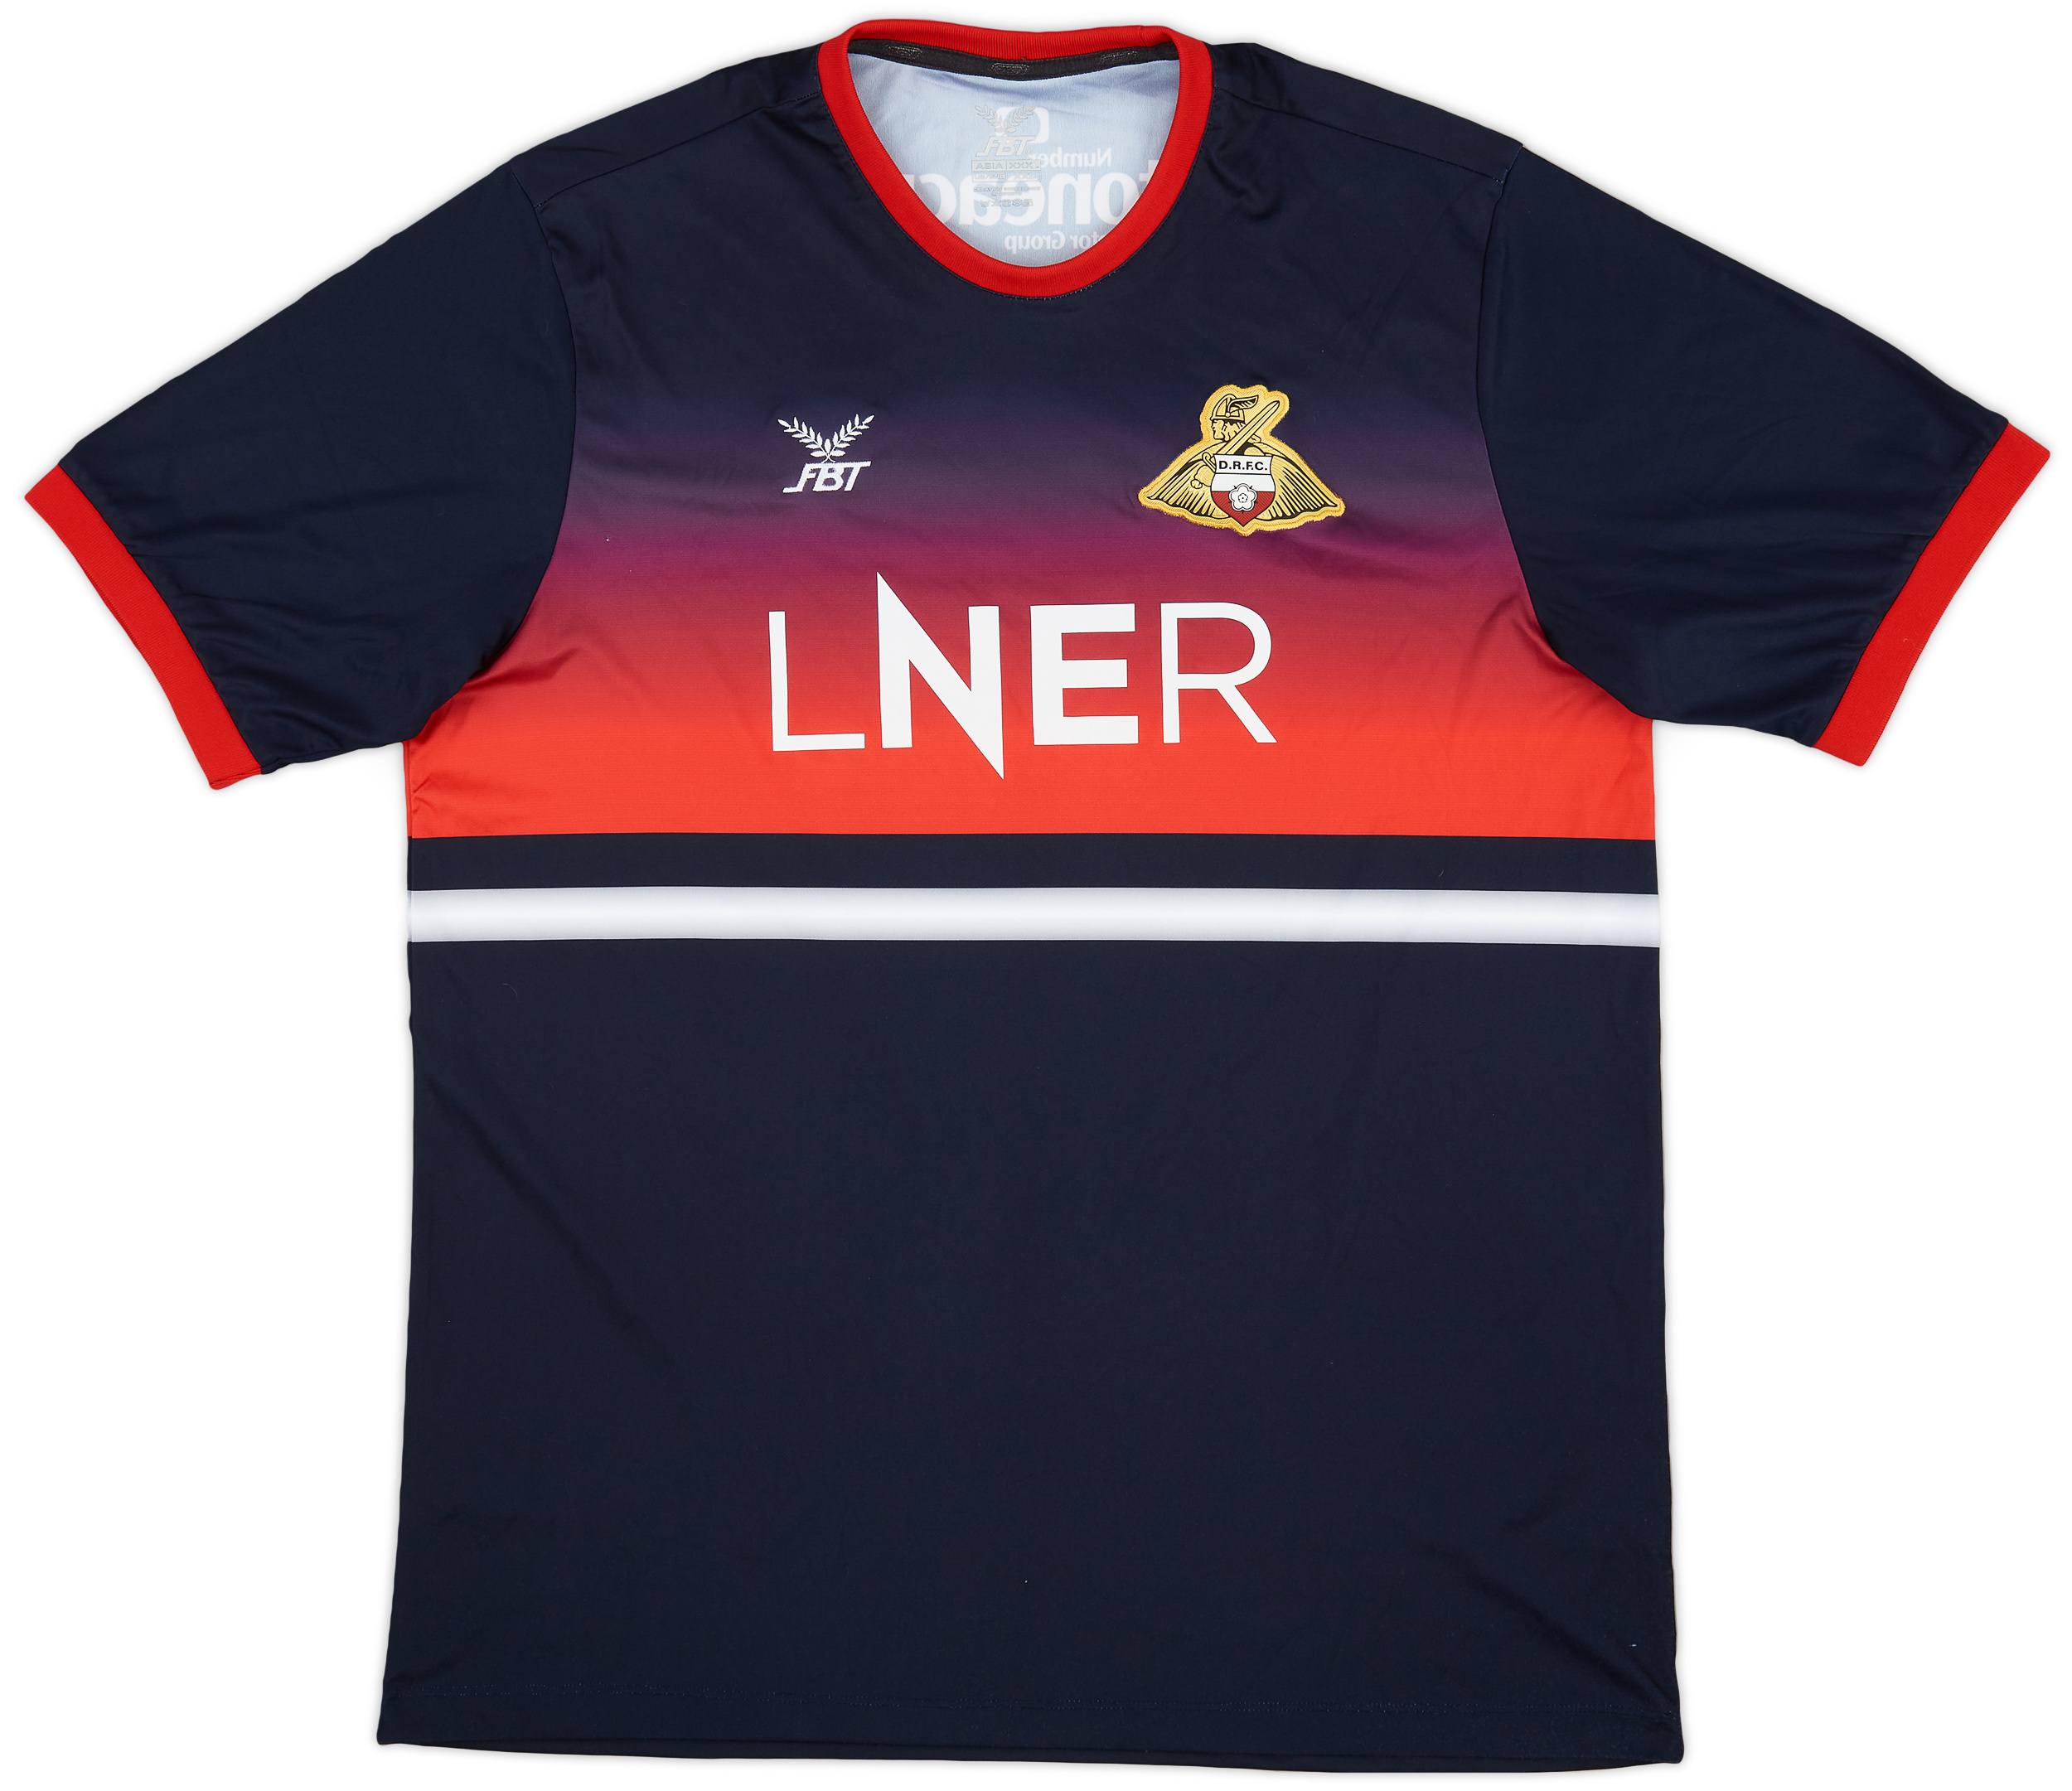 2018-19 Doncaster Rovers Away Shirt - Excellent 9/10 - ()